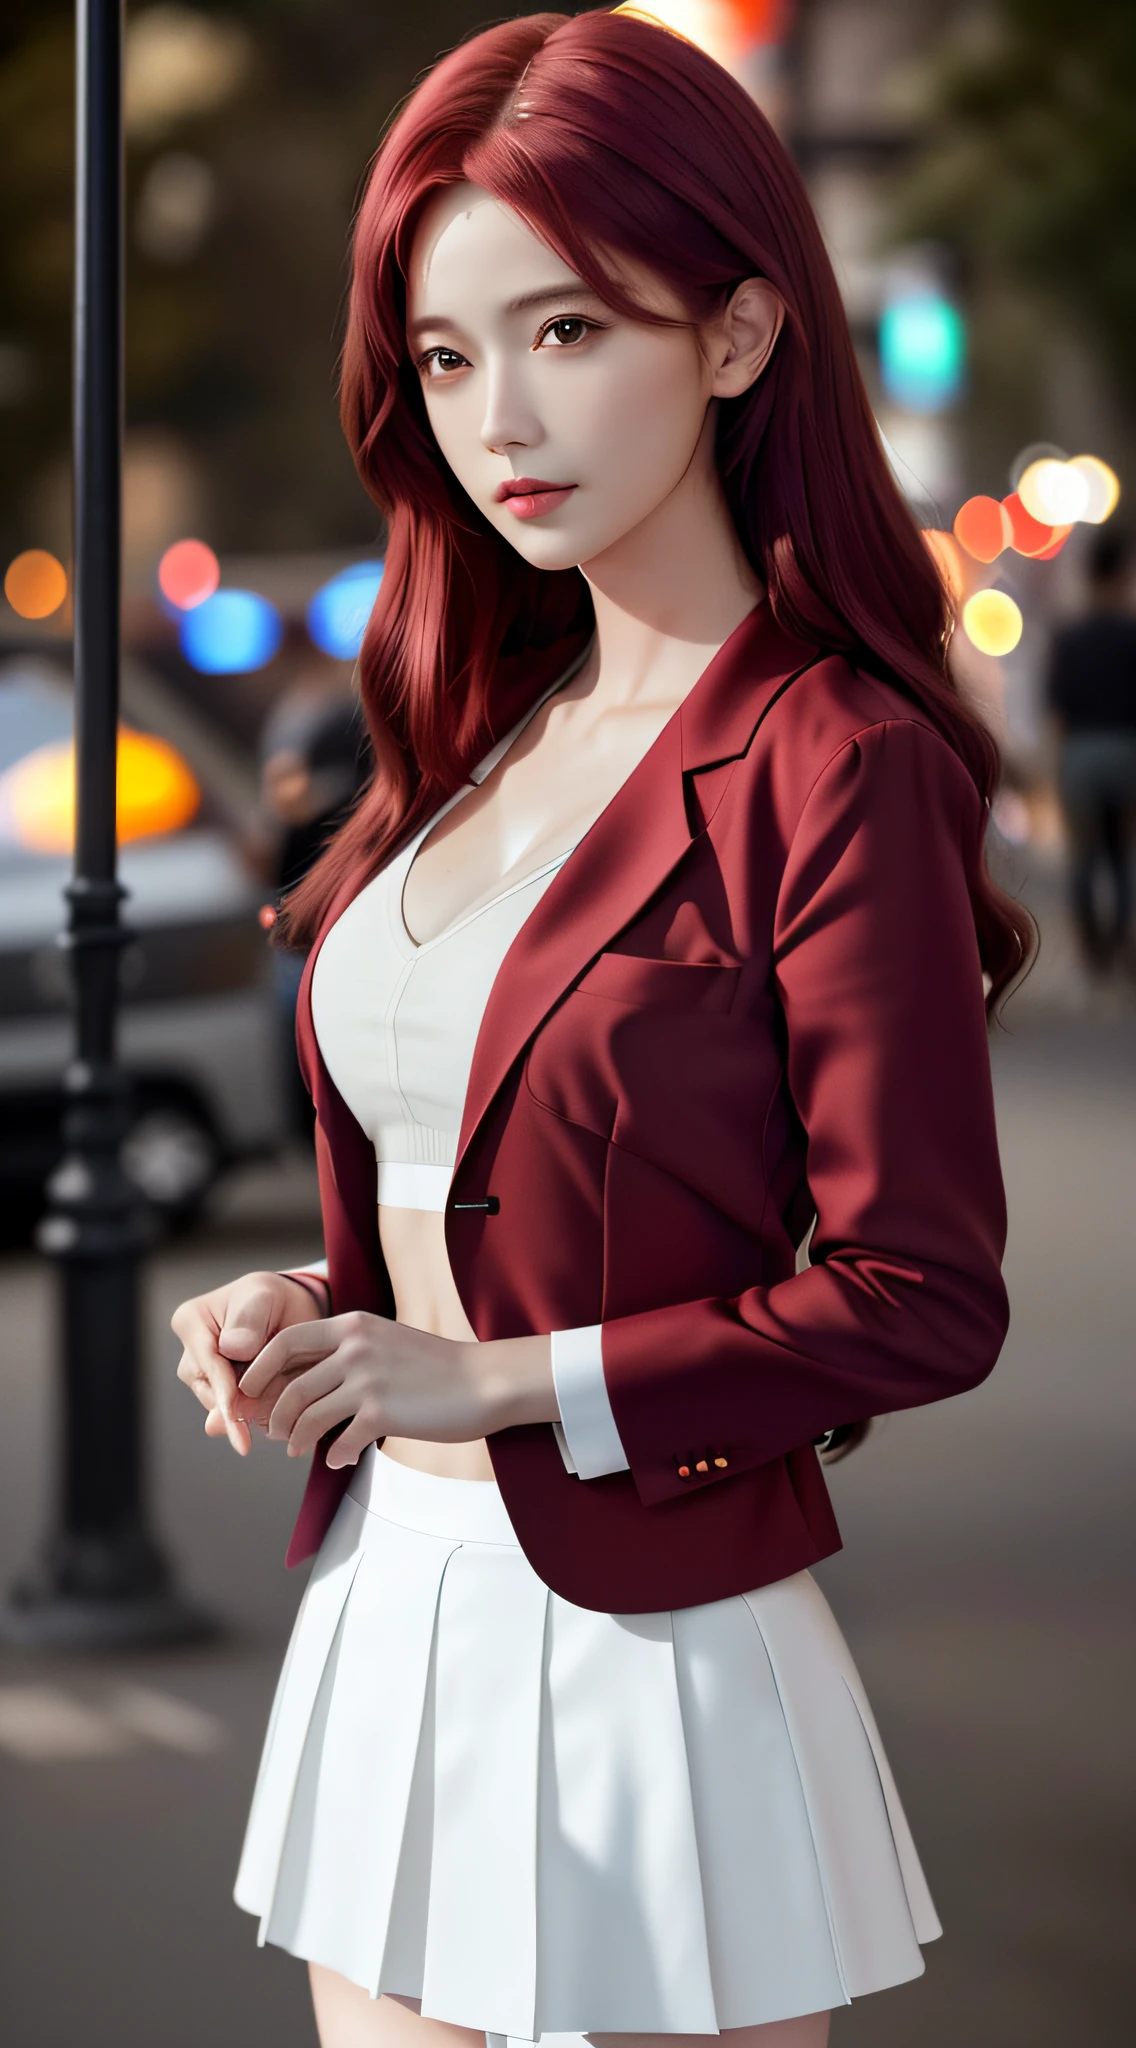 ((Realistic lighting, Best quality, 8K, Masterpiece: 1.3)), Clear focus: 1.2, 1girl, Perfect body beauty: 1.4, Slim abs: 1.1, ((light red hair)), (White blazer: 1.4), (Outdoor, night: 1.1), City streets, Super fine face, Fine eyes, double eyelids, Best proportions of four fingers and one thumb, (Realistic: 1.3), Cute 1girl, medium breasts, short white skirt